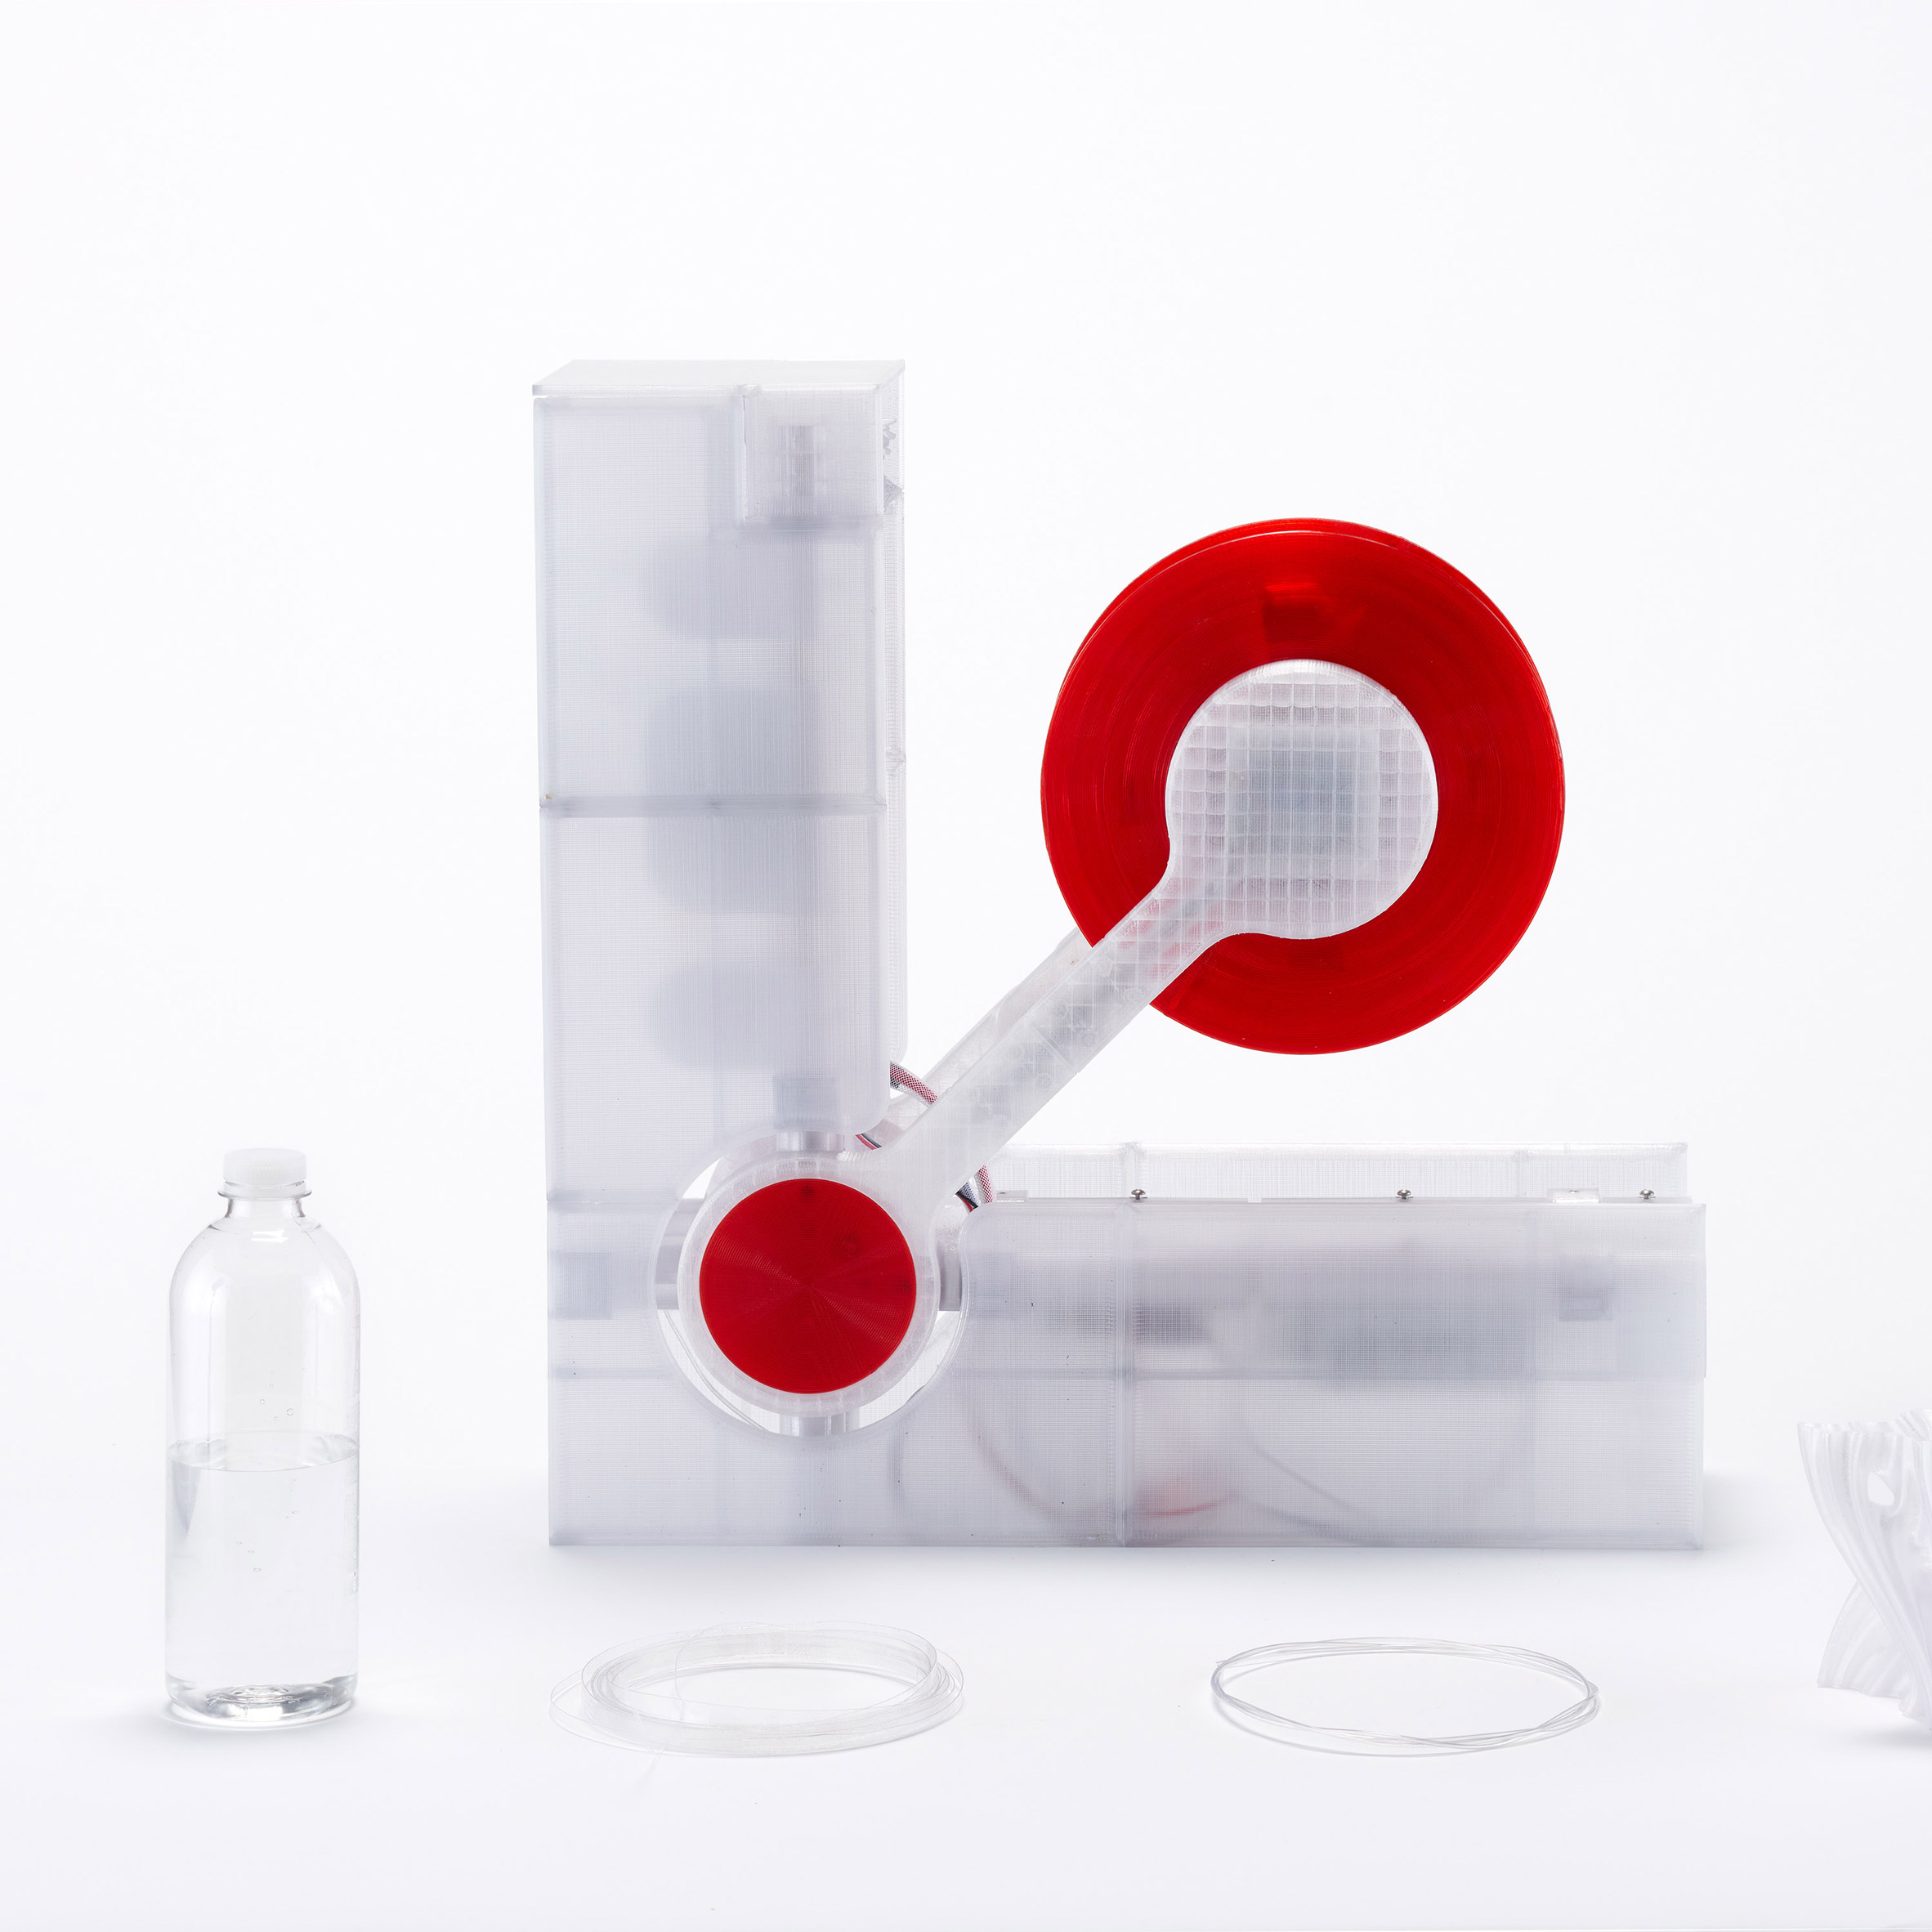 Open-source Polyformer turns bottles into 3D printing filament